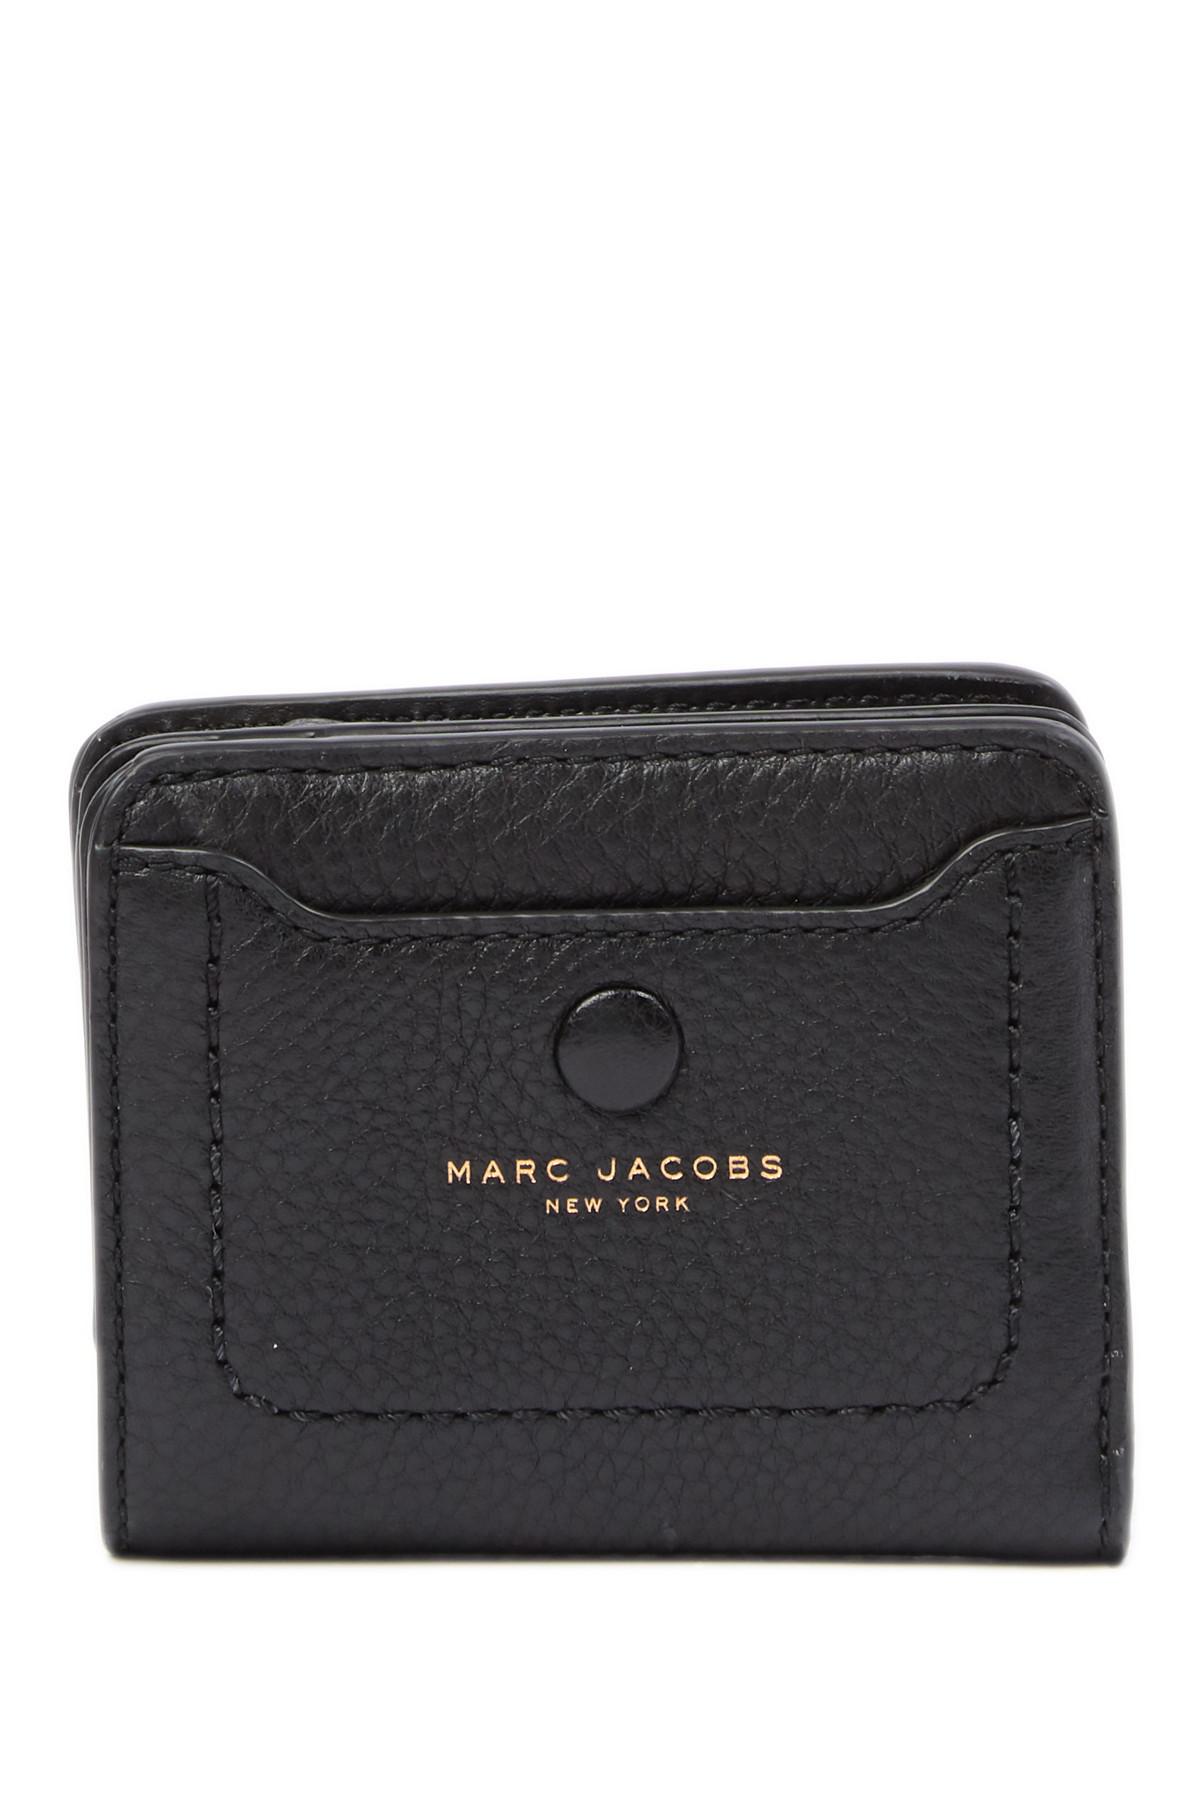 Marc Jacobs Empire City Mini Compact Leather Coin Wallet in Black - Lyst